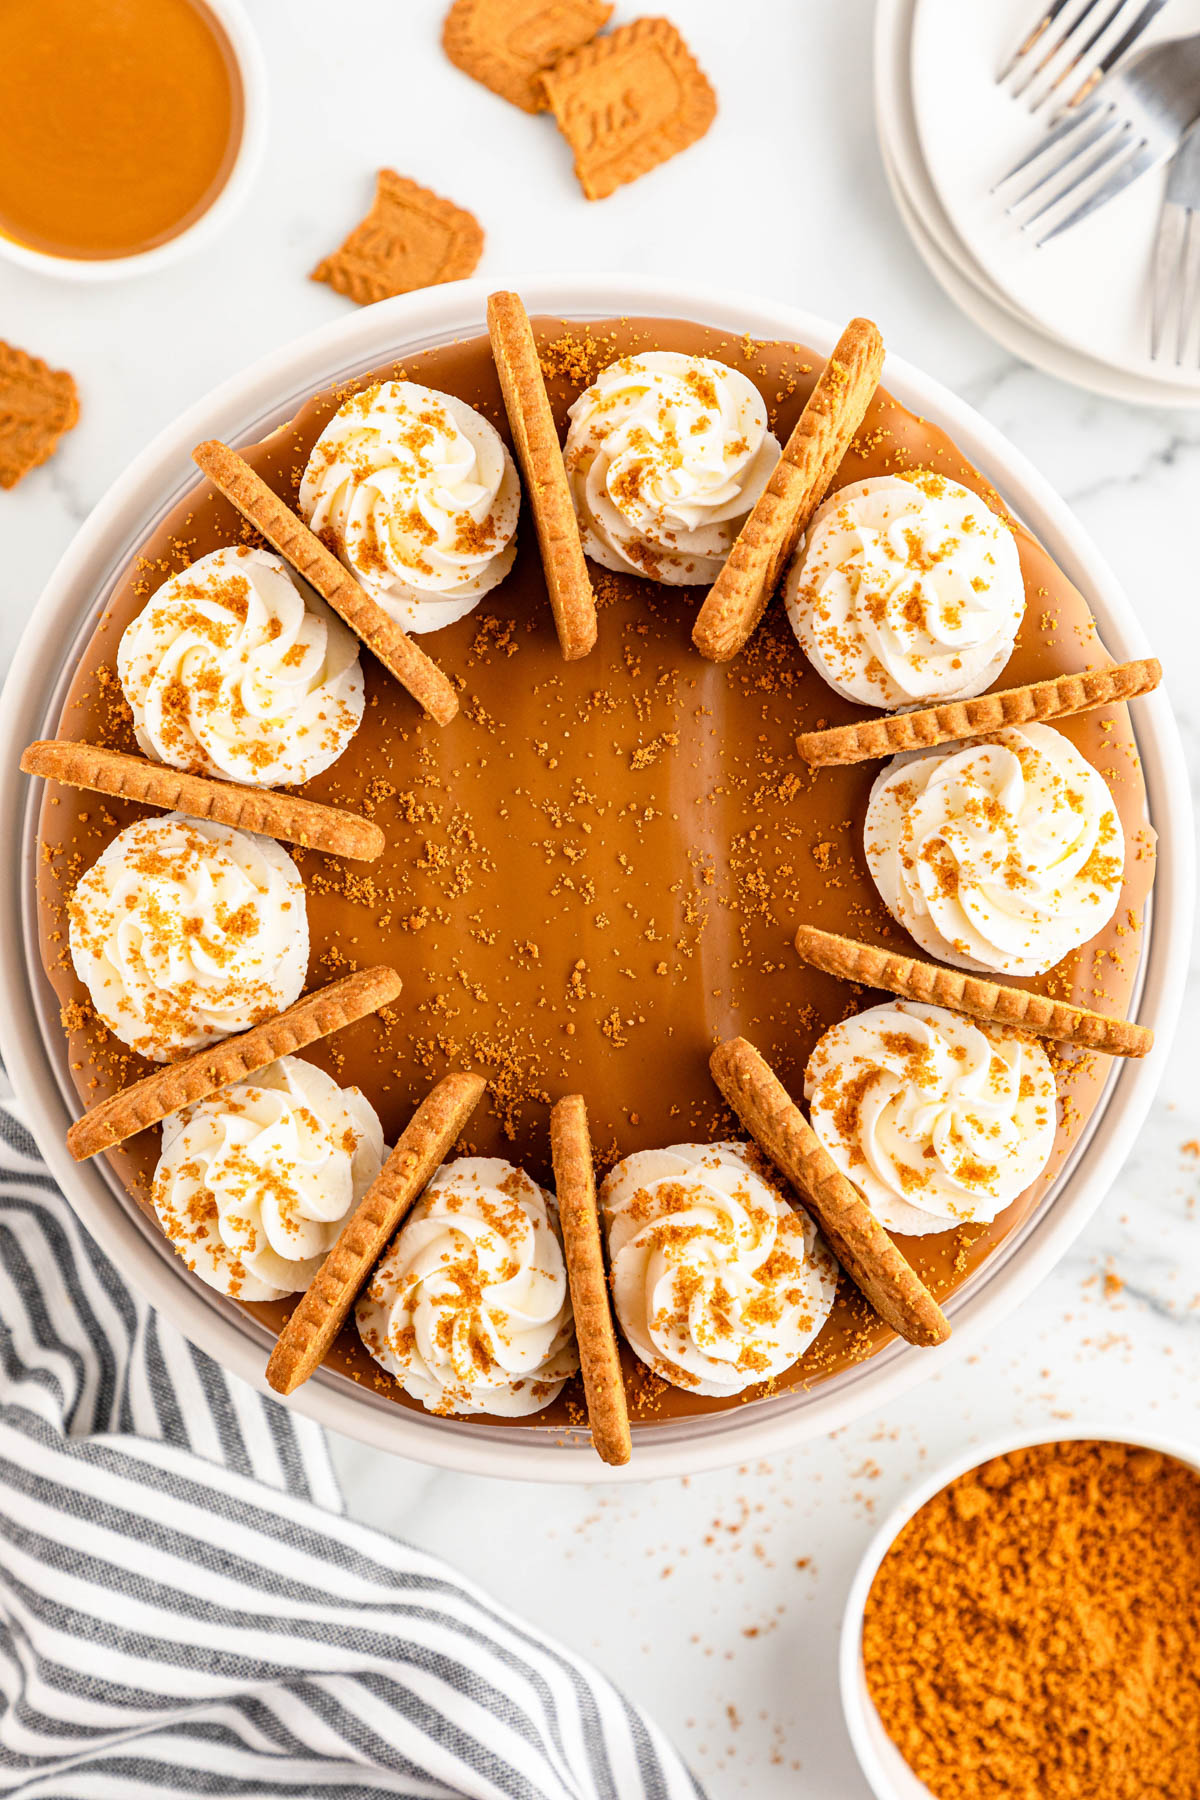 A Biscoff cheesecake with whipped cream and graham crackers on a plate.